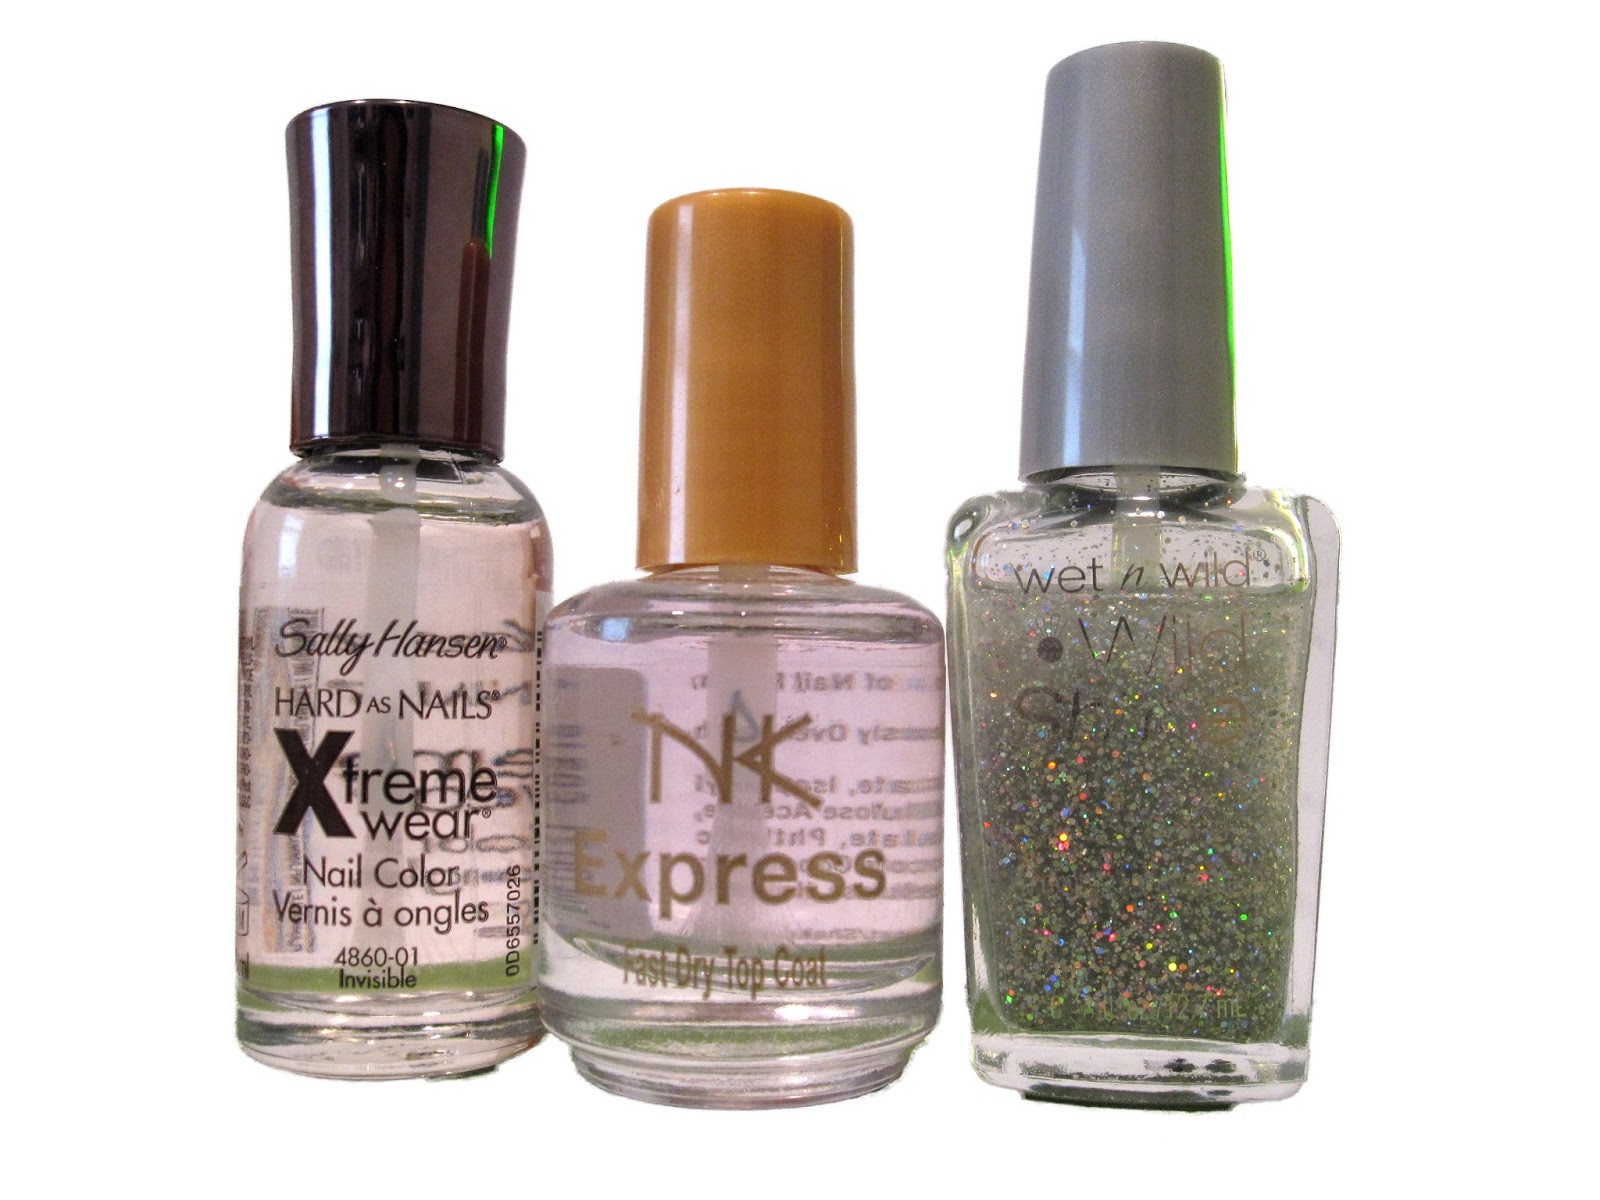 3. Sally Hansen Hard as Nails Xtreme Wear, Invisible - wide 5